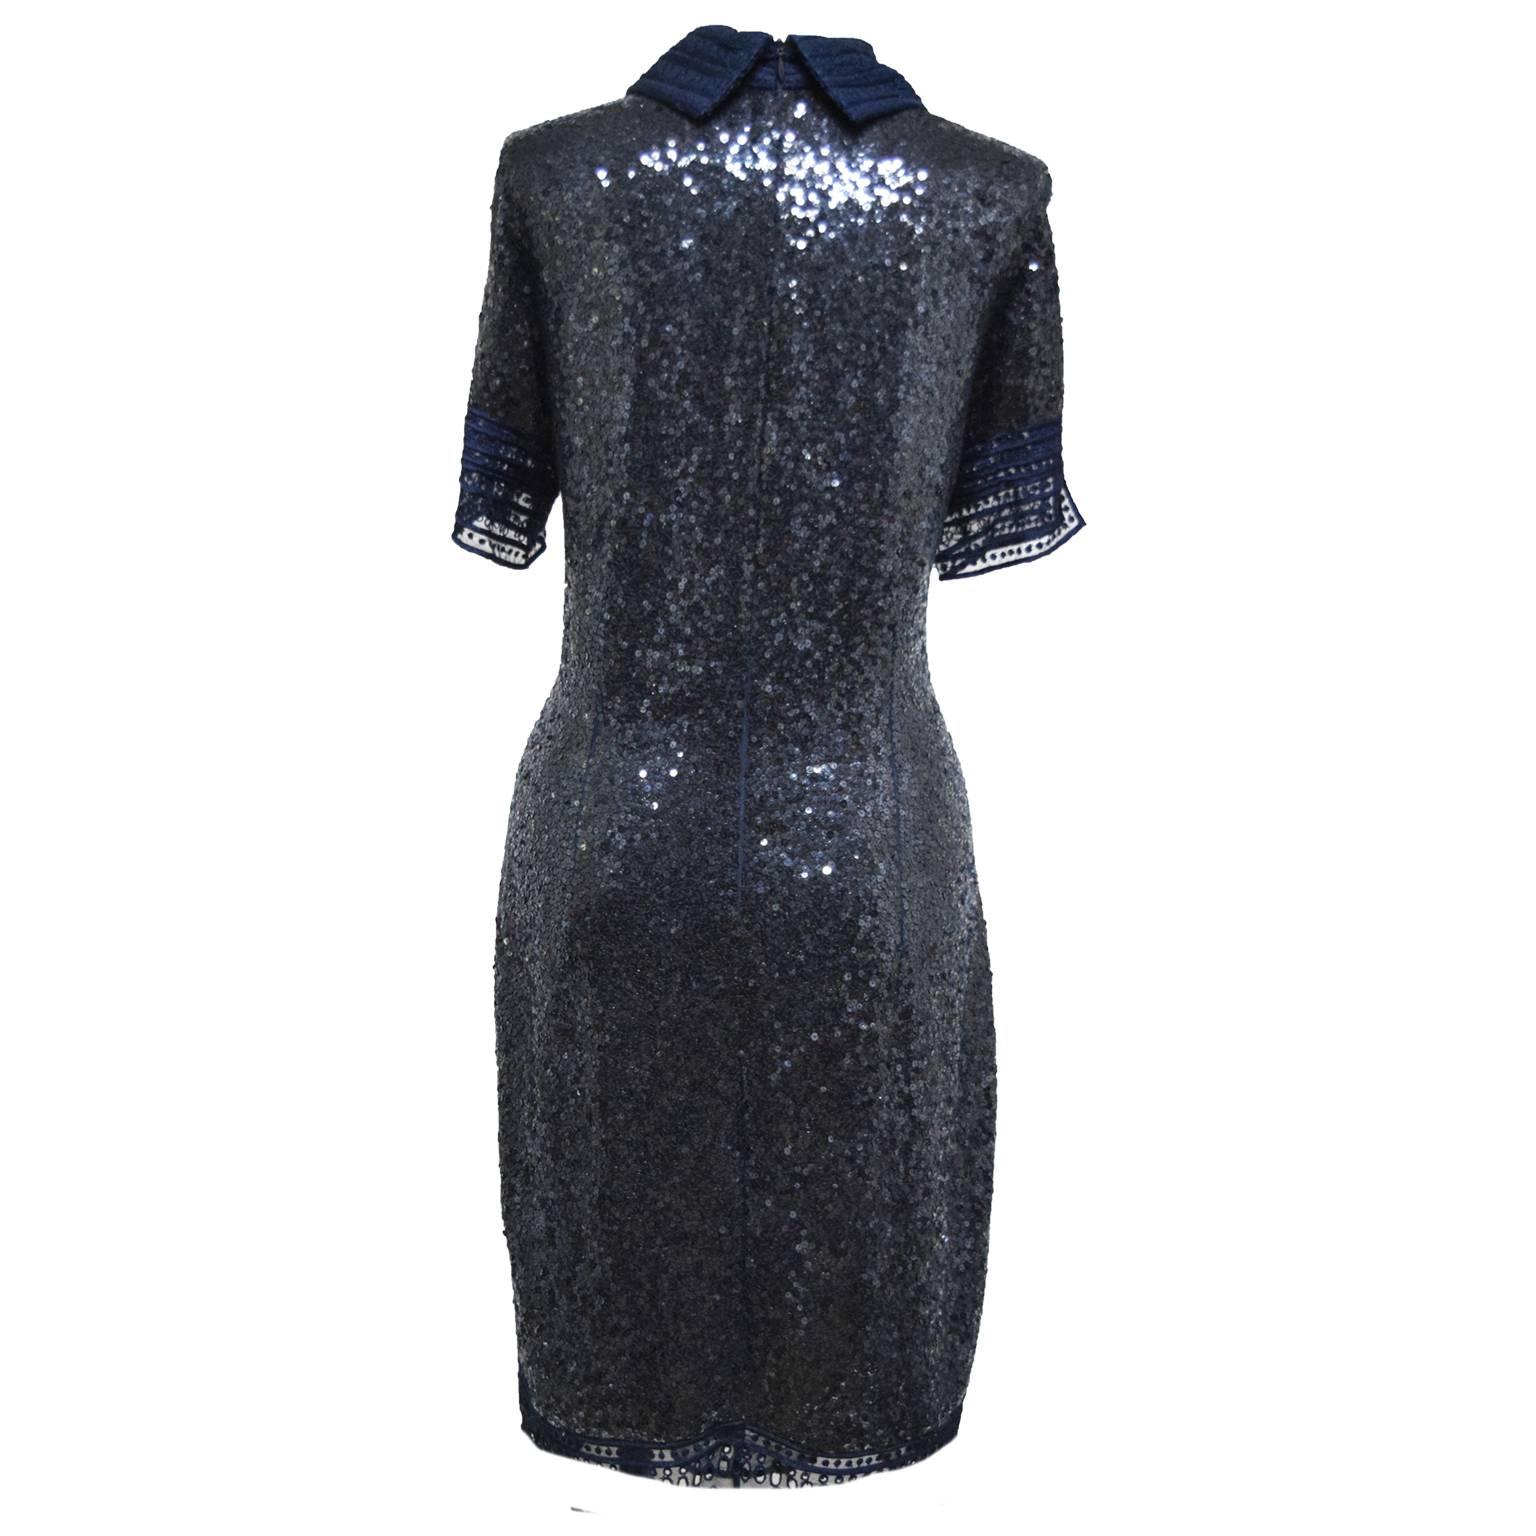 This beautiful sequins navy shirt dress can be worn for any occasion. Made out of silk and lace, this cocktail dress has an upscale elegant, but casual style to it. Hand sewn sequins are on the overall dress, while brocade lace is used as